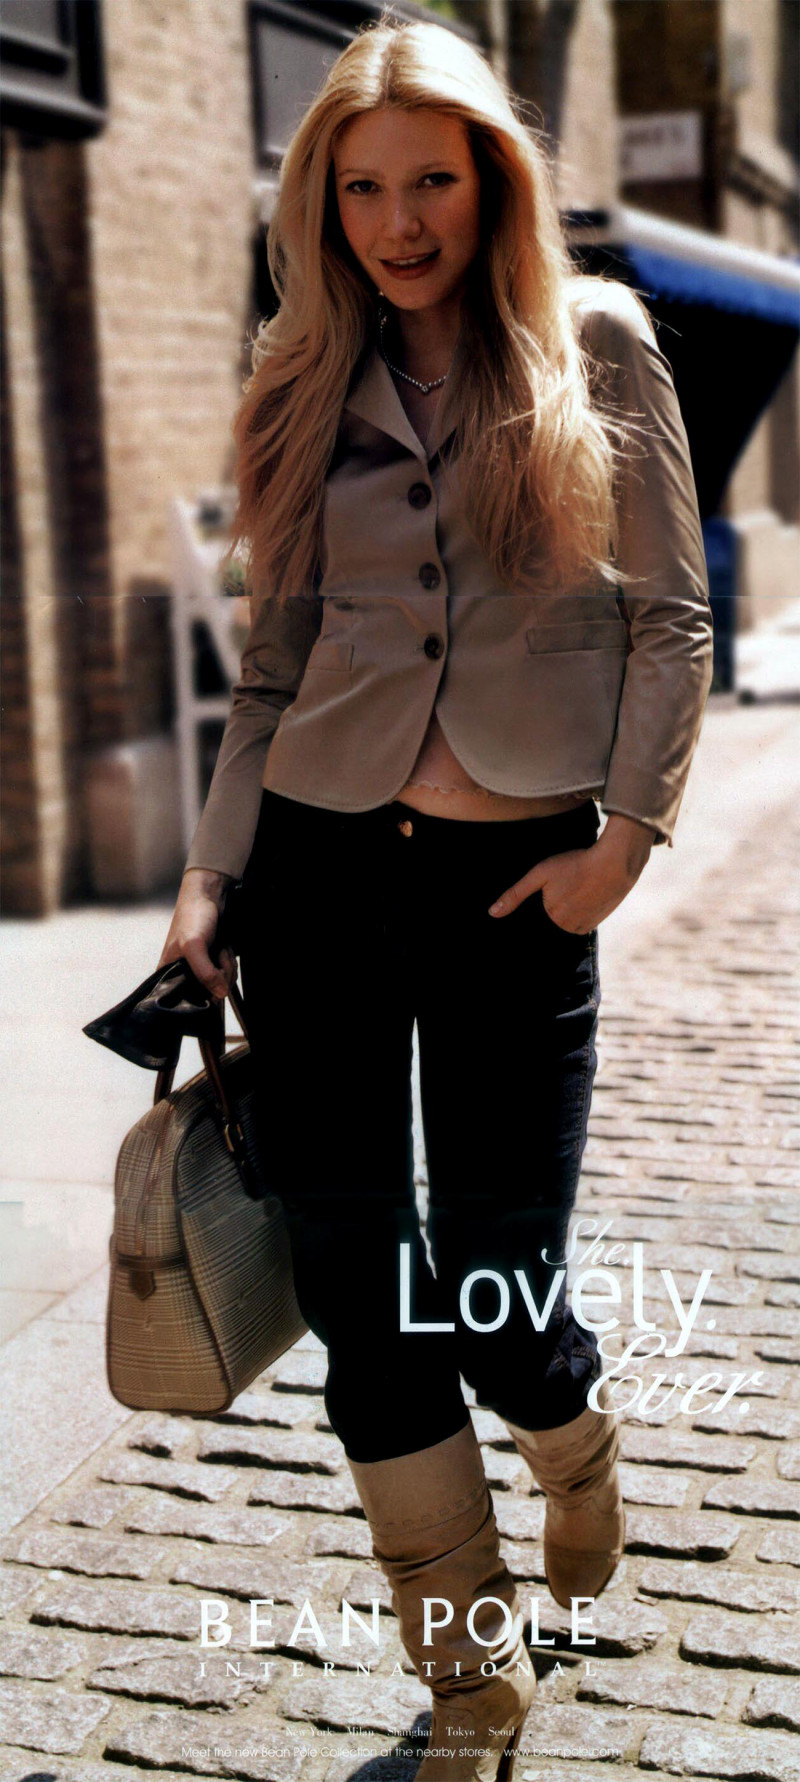 Gwyneth Paltrow featured in  the Bean Pole advertisement for Autumn/Winter 2007